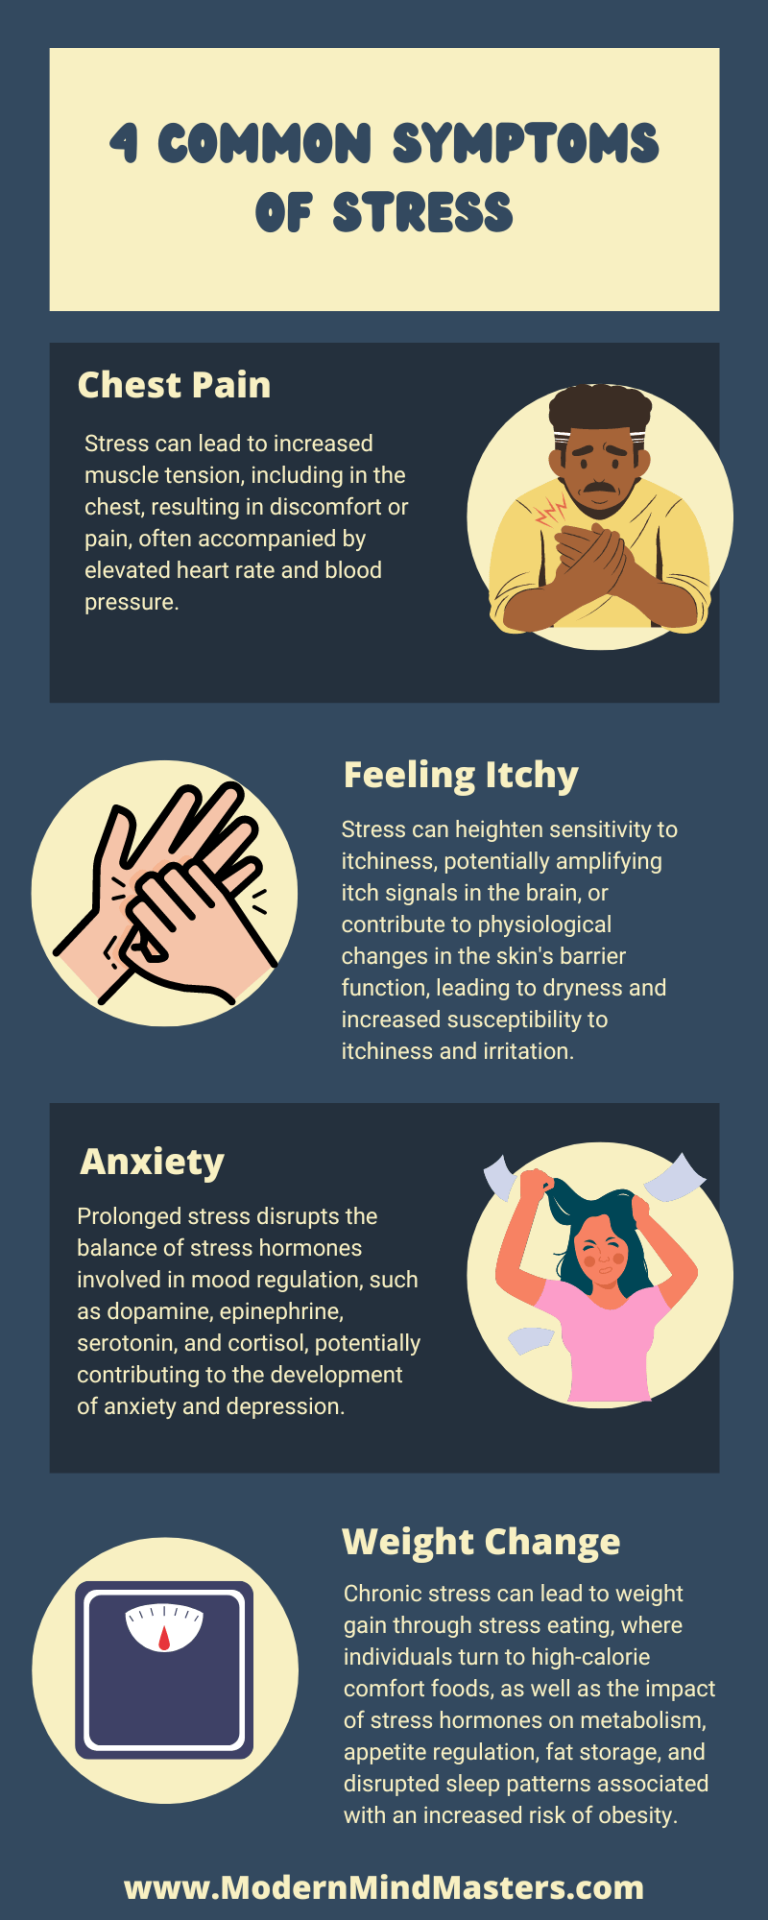 Chest Pain, Itchiness, Anxiety, and Weight Change are all potential symptoms of Stress.